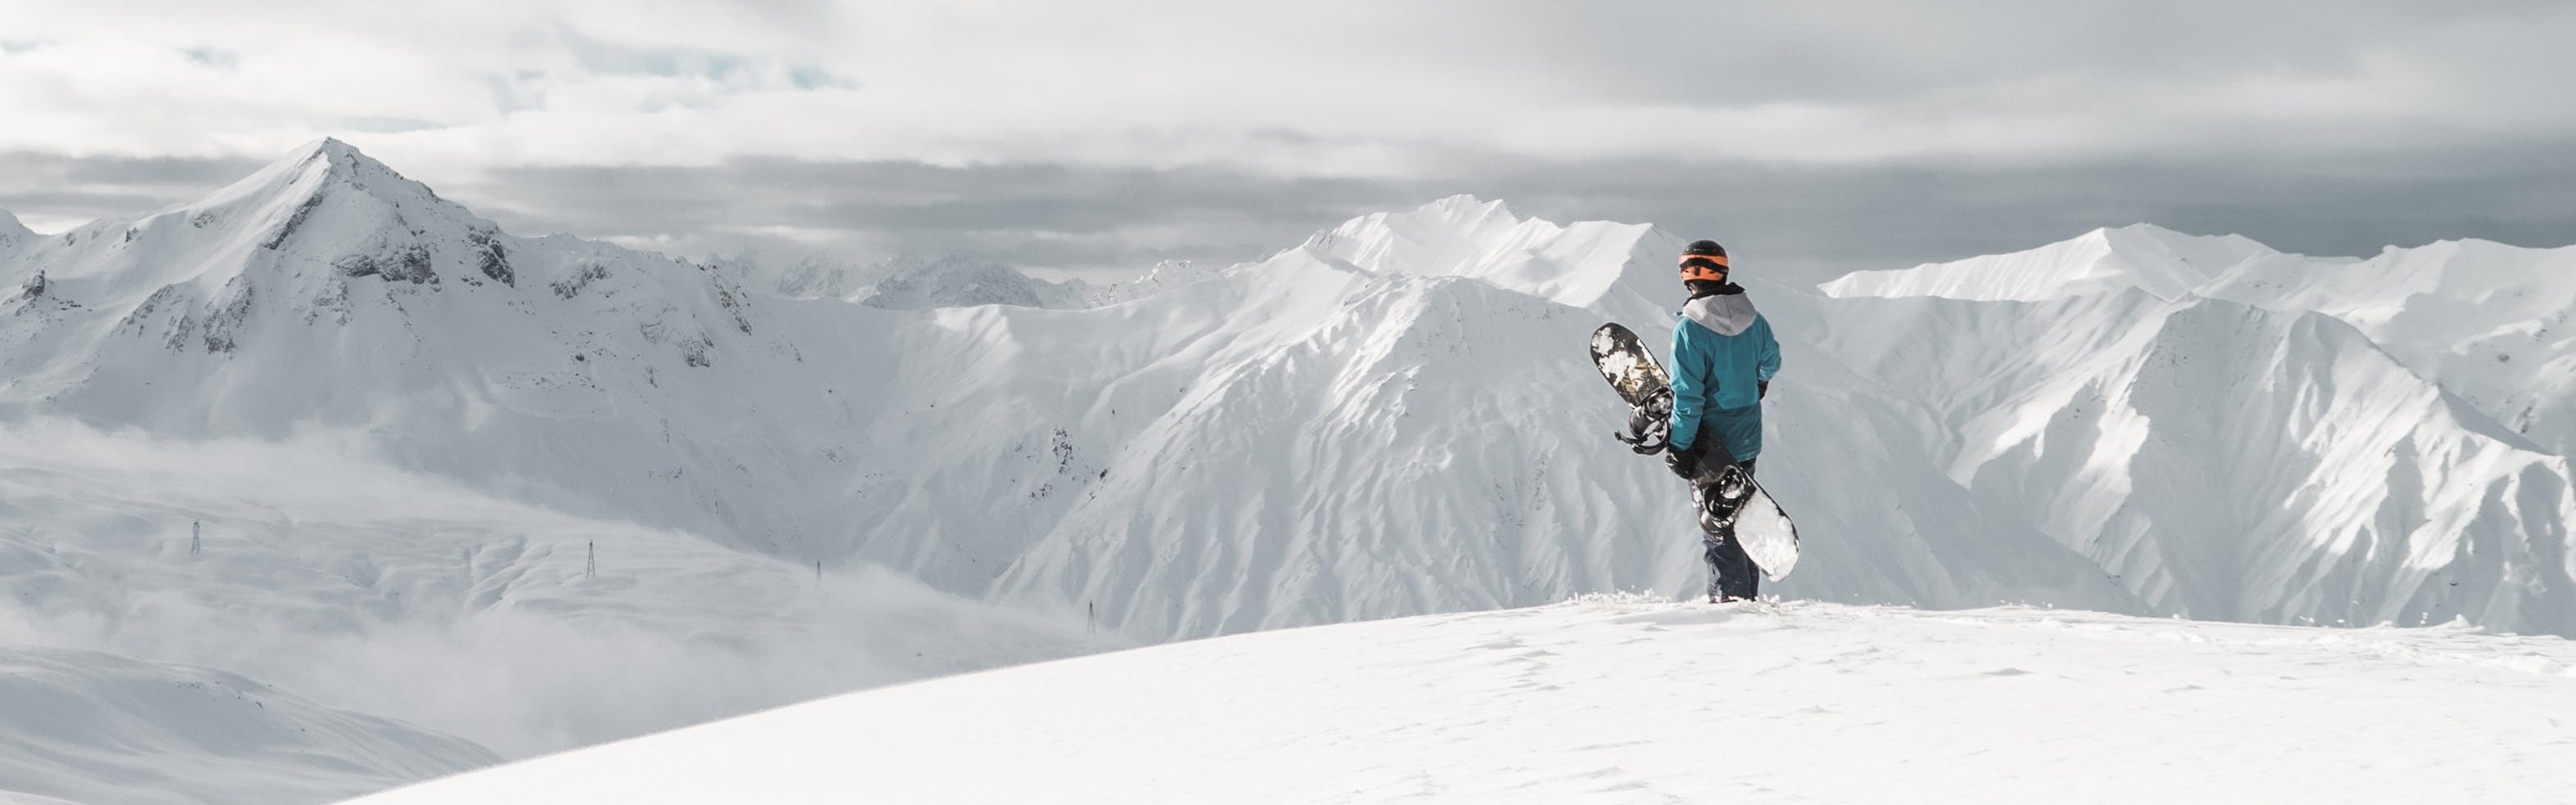 A snowboarder stands at the top of a run and looks down at snowy mountains